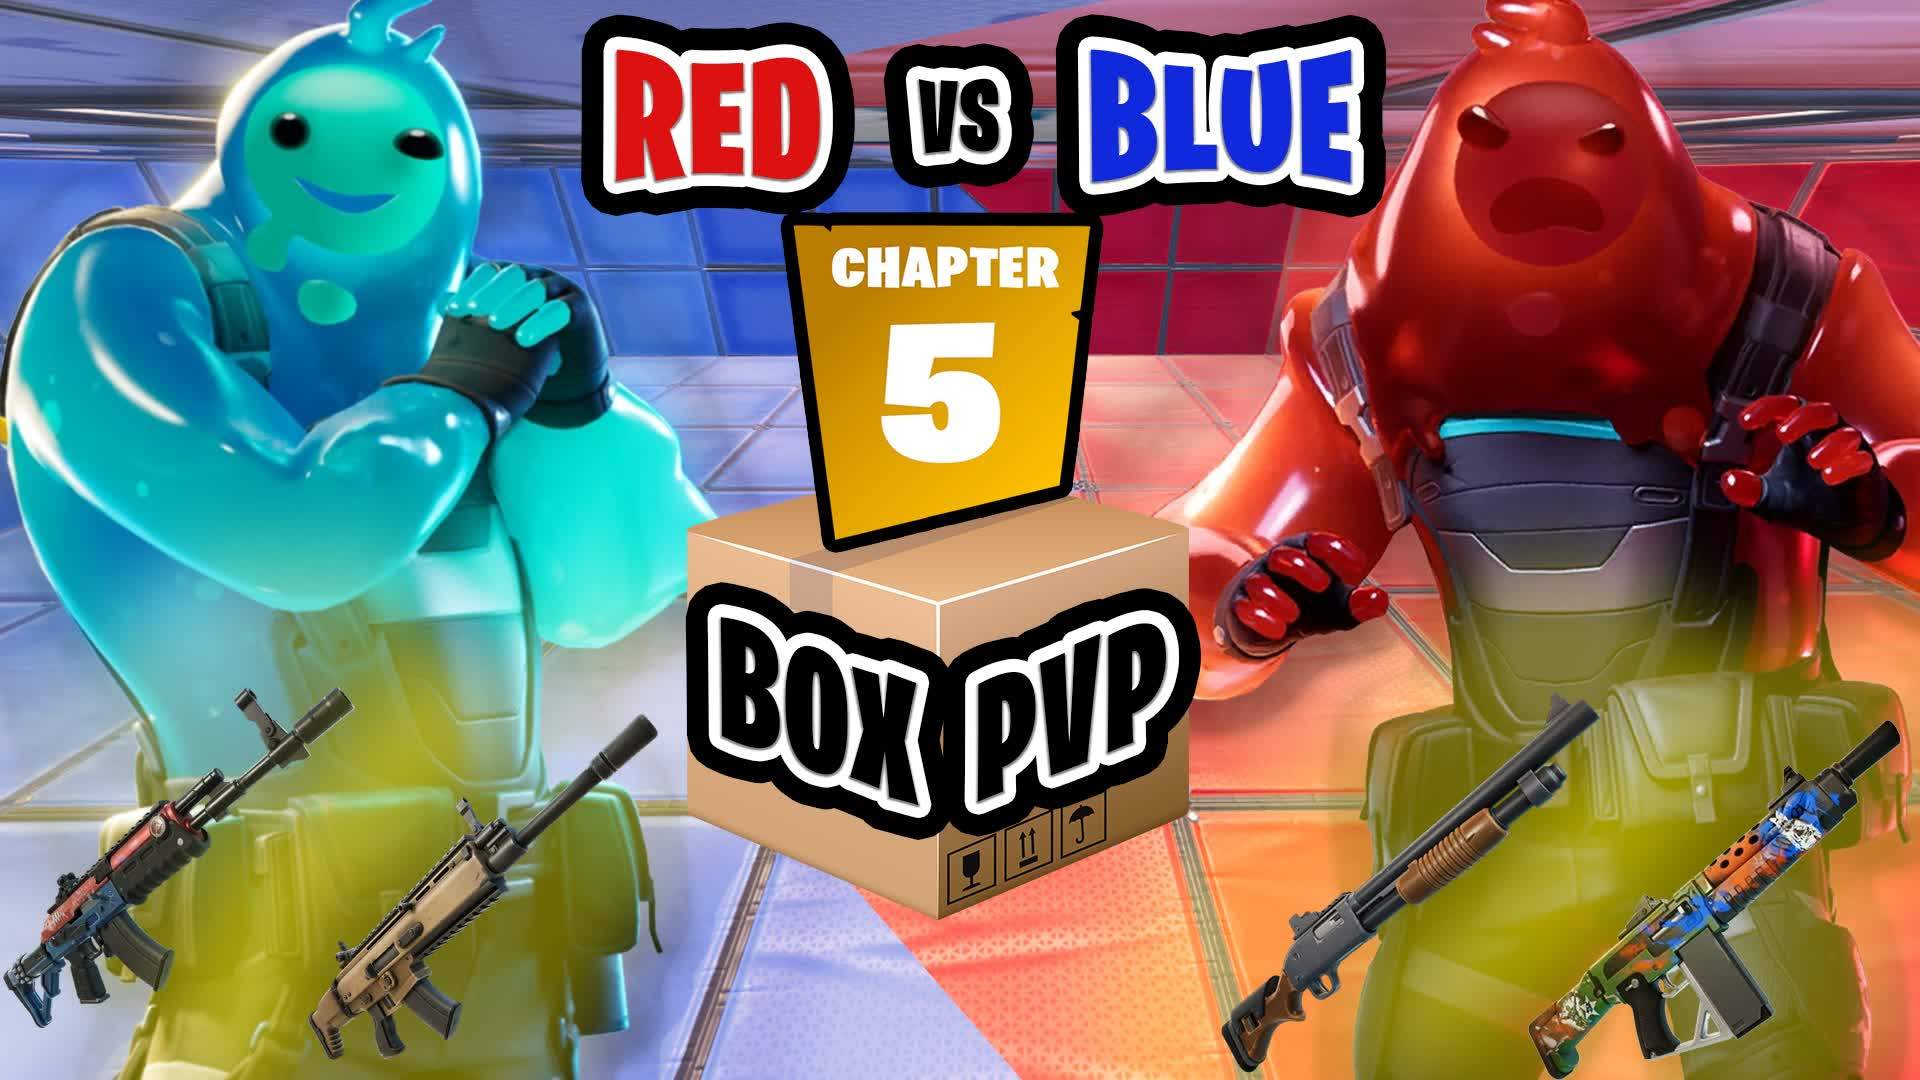 CHAPTER 5 RED VS BLUE BOX PVP